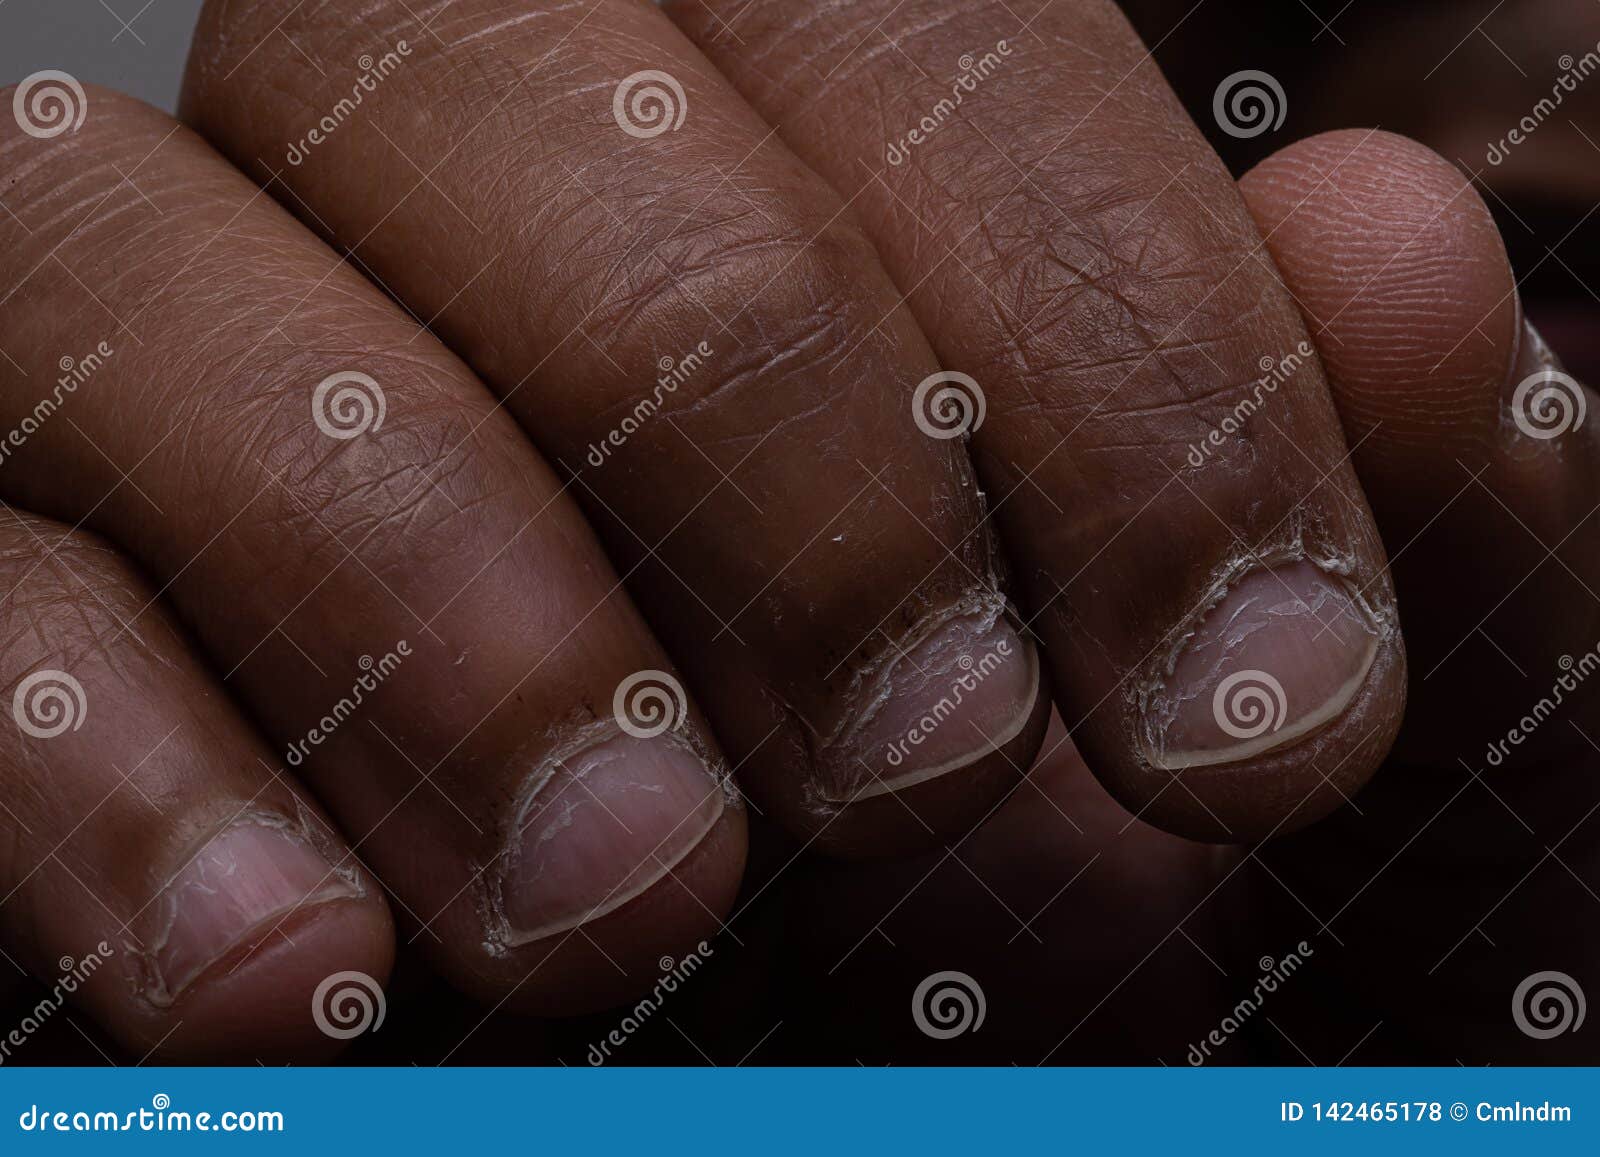 Premium Photo | The nails on the fingers of a womans hand painted in blue,  red, yellow, purple and black lacquer